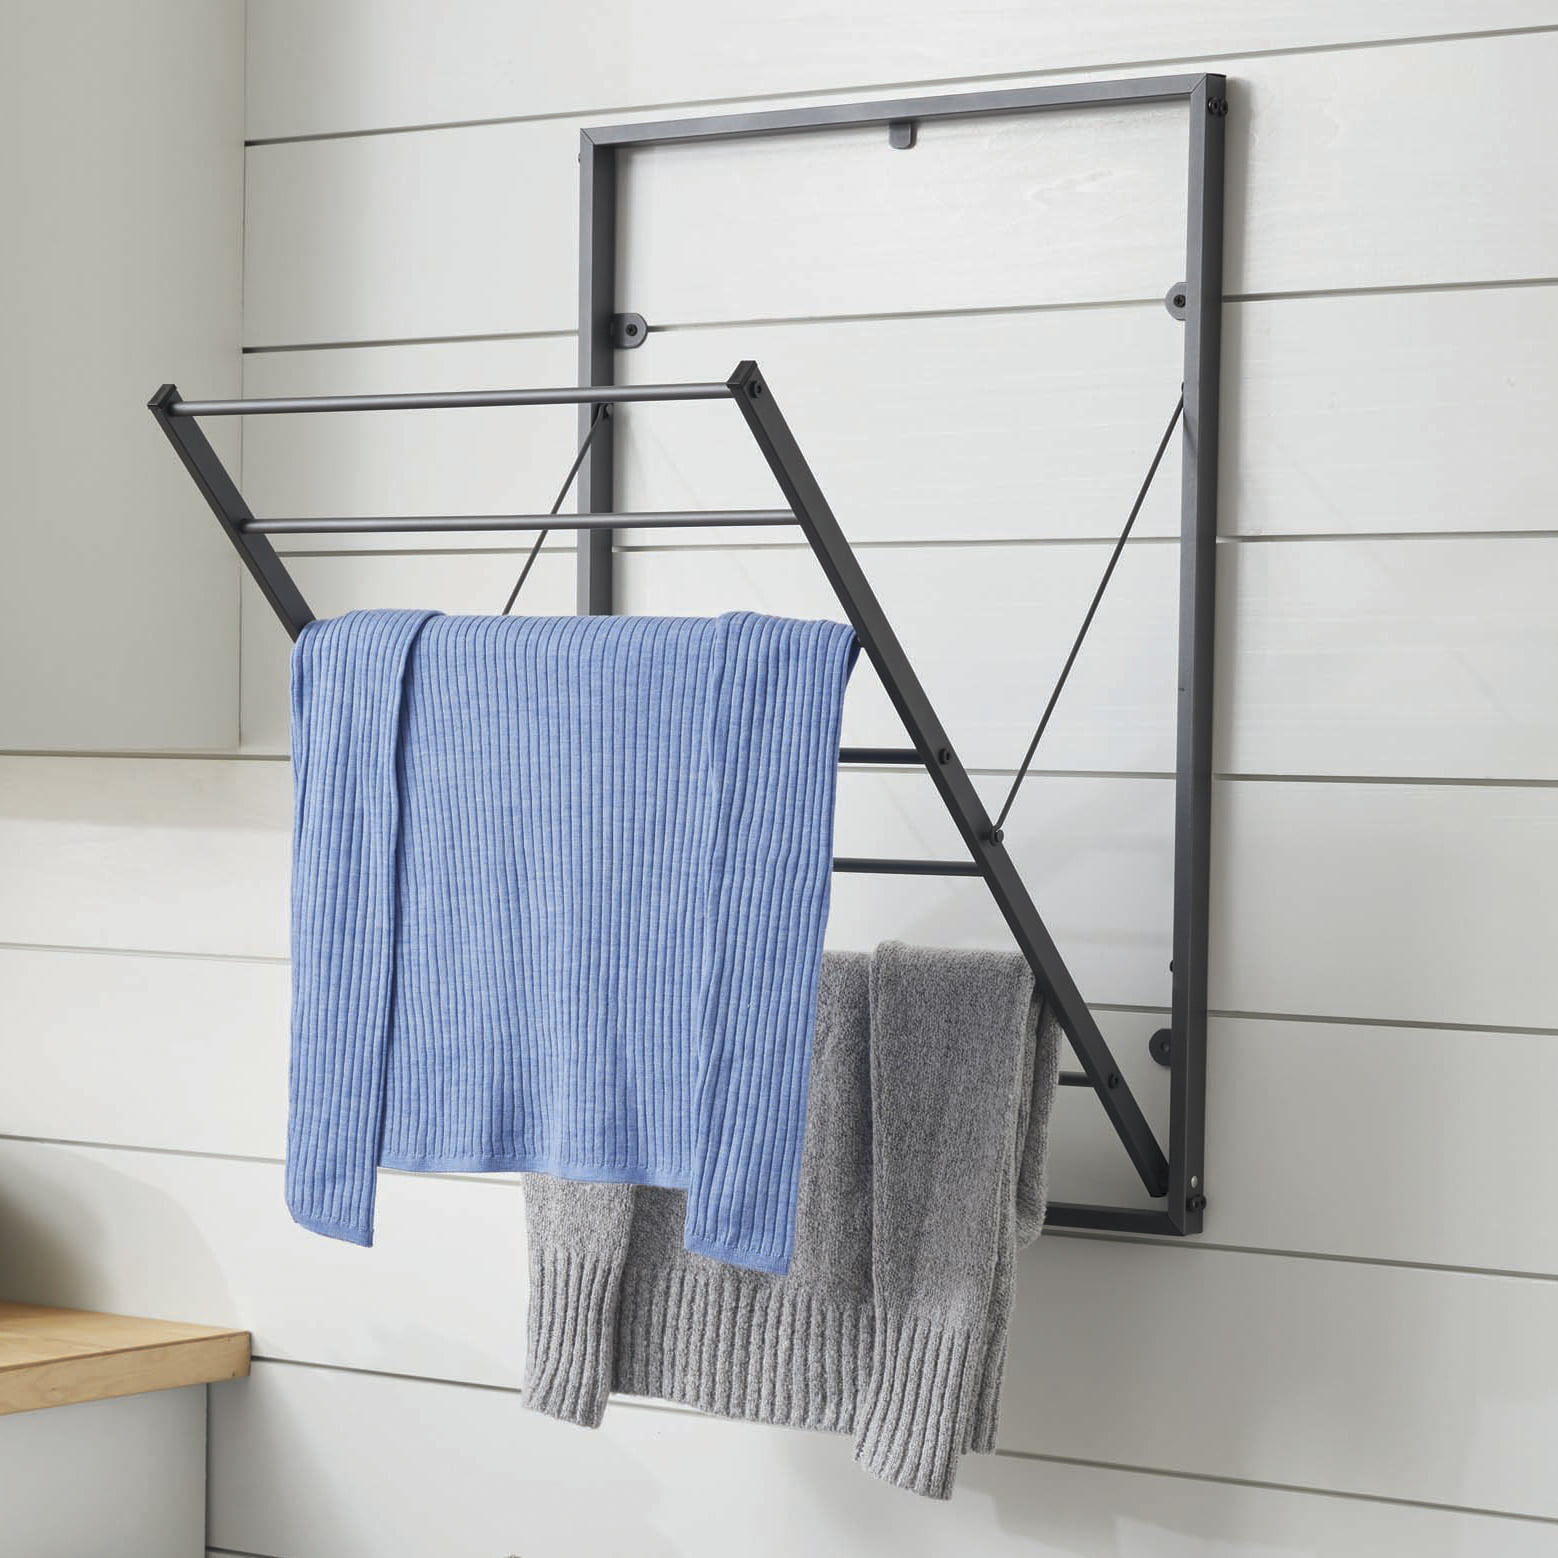 BirdRock Home Folding Steel Clothes Drying Rack - 3 Tier - Grey - On Sale -  Bed Bath & Beyond - 32036091